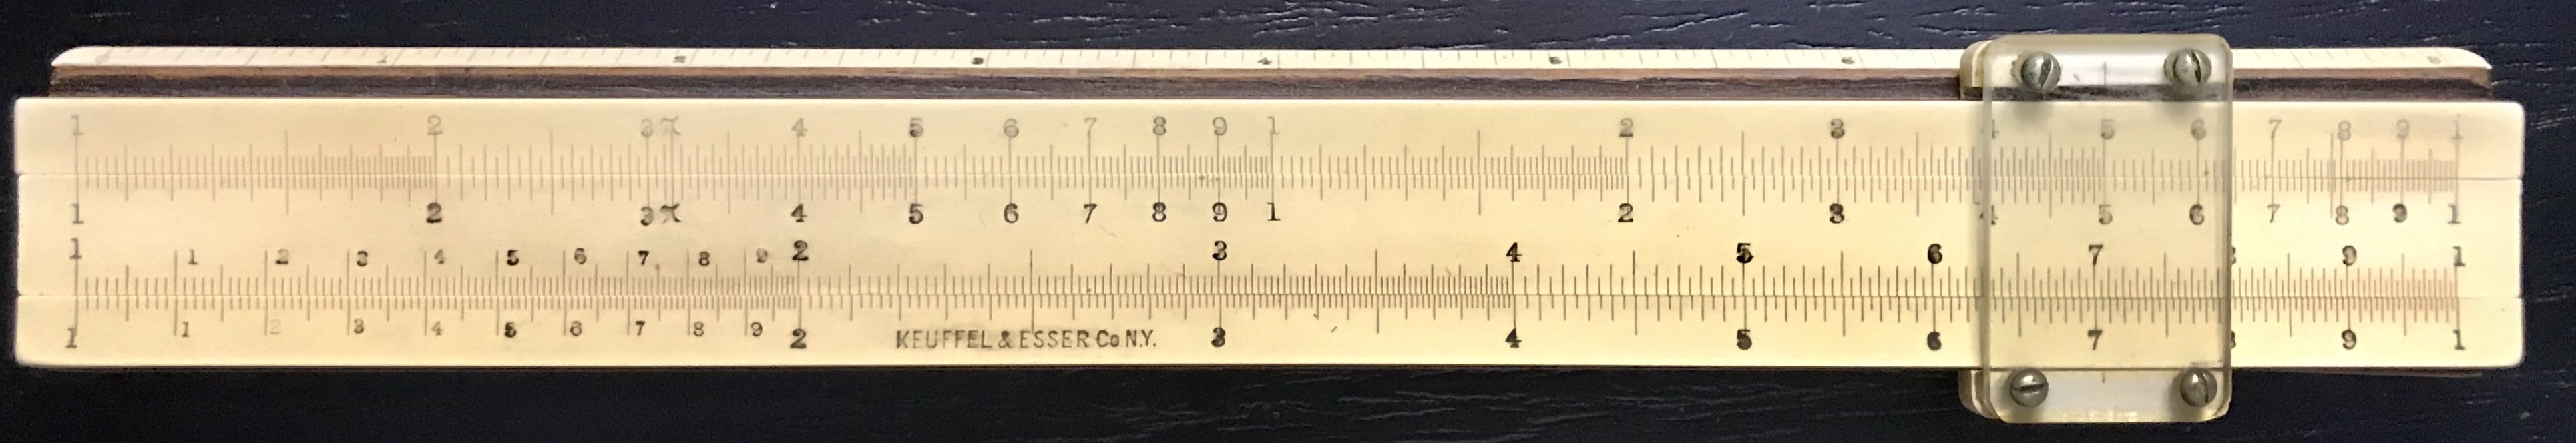 Keuffel and Esser 4035-S 8-inch rule, 1922.